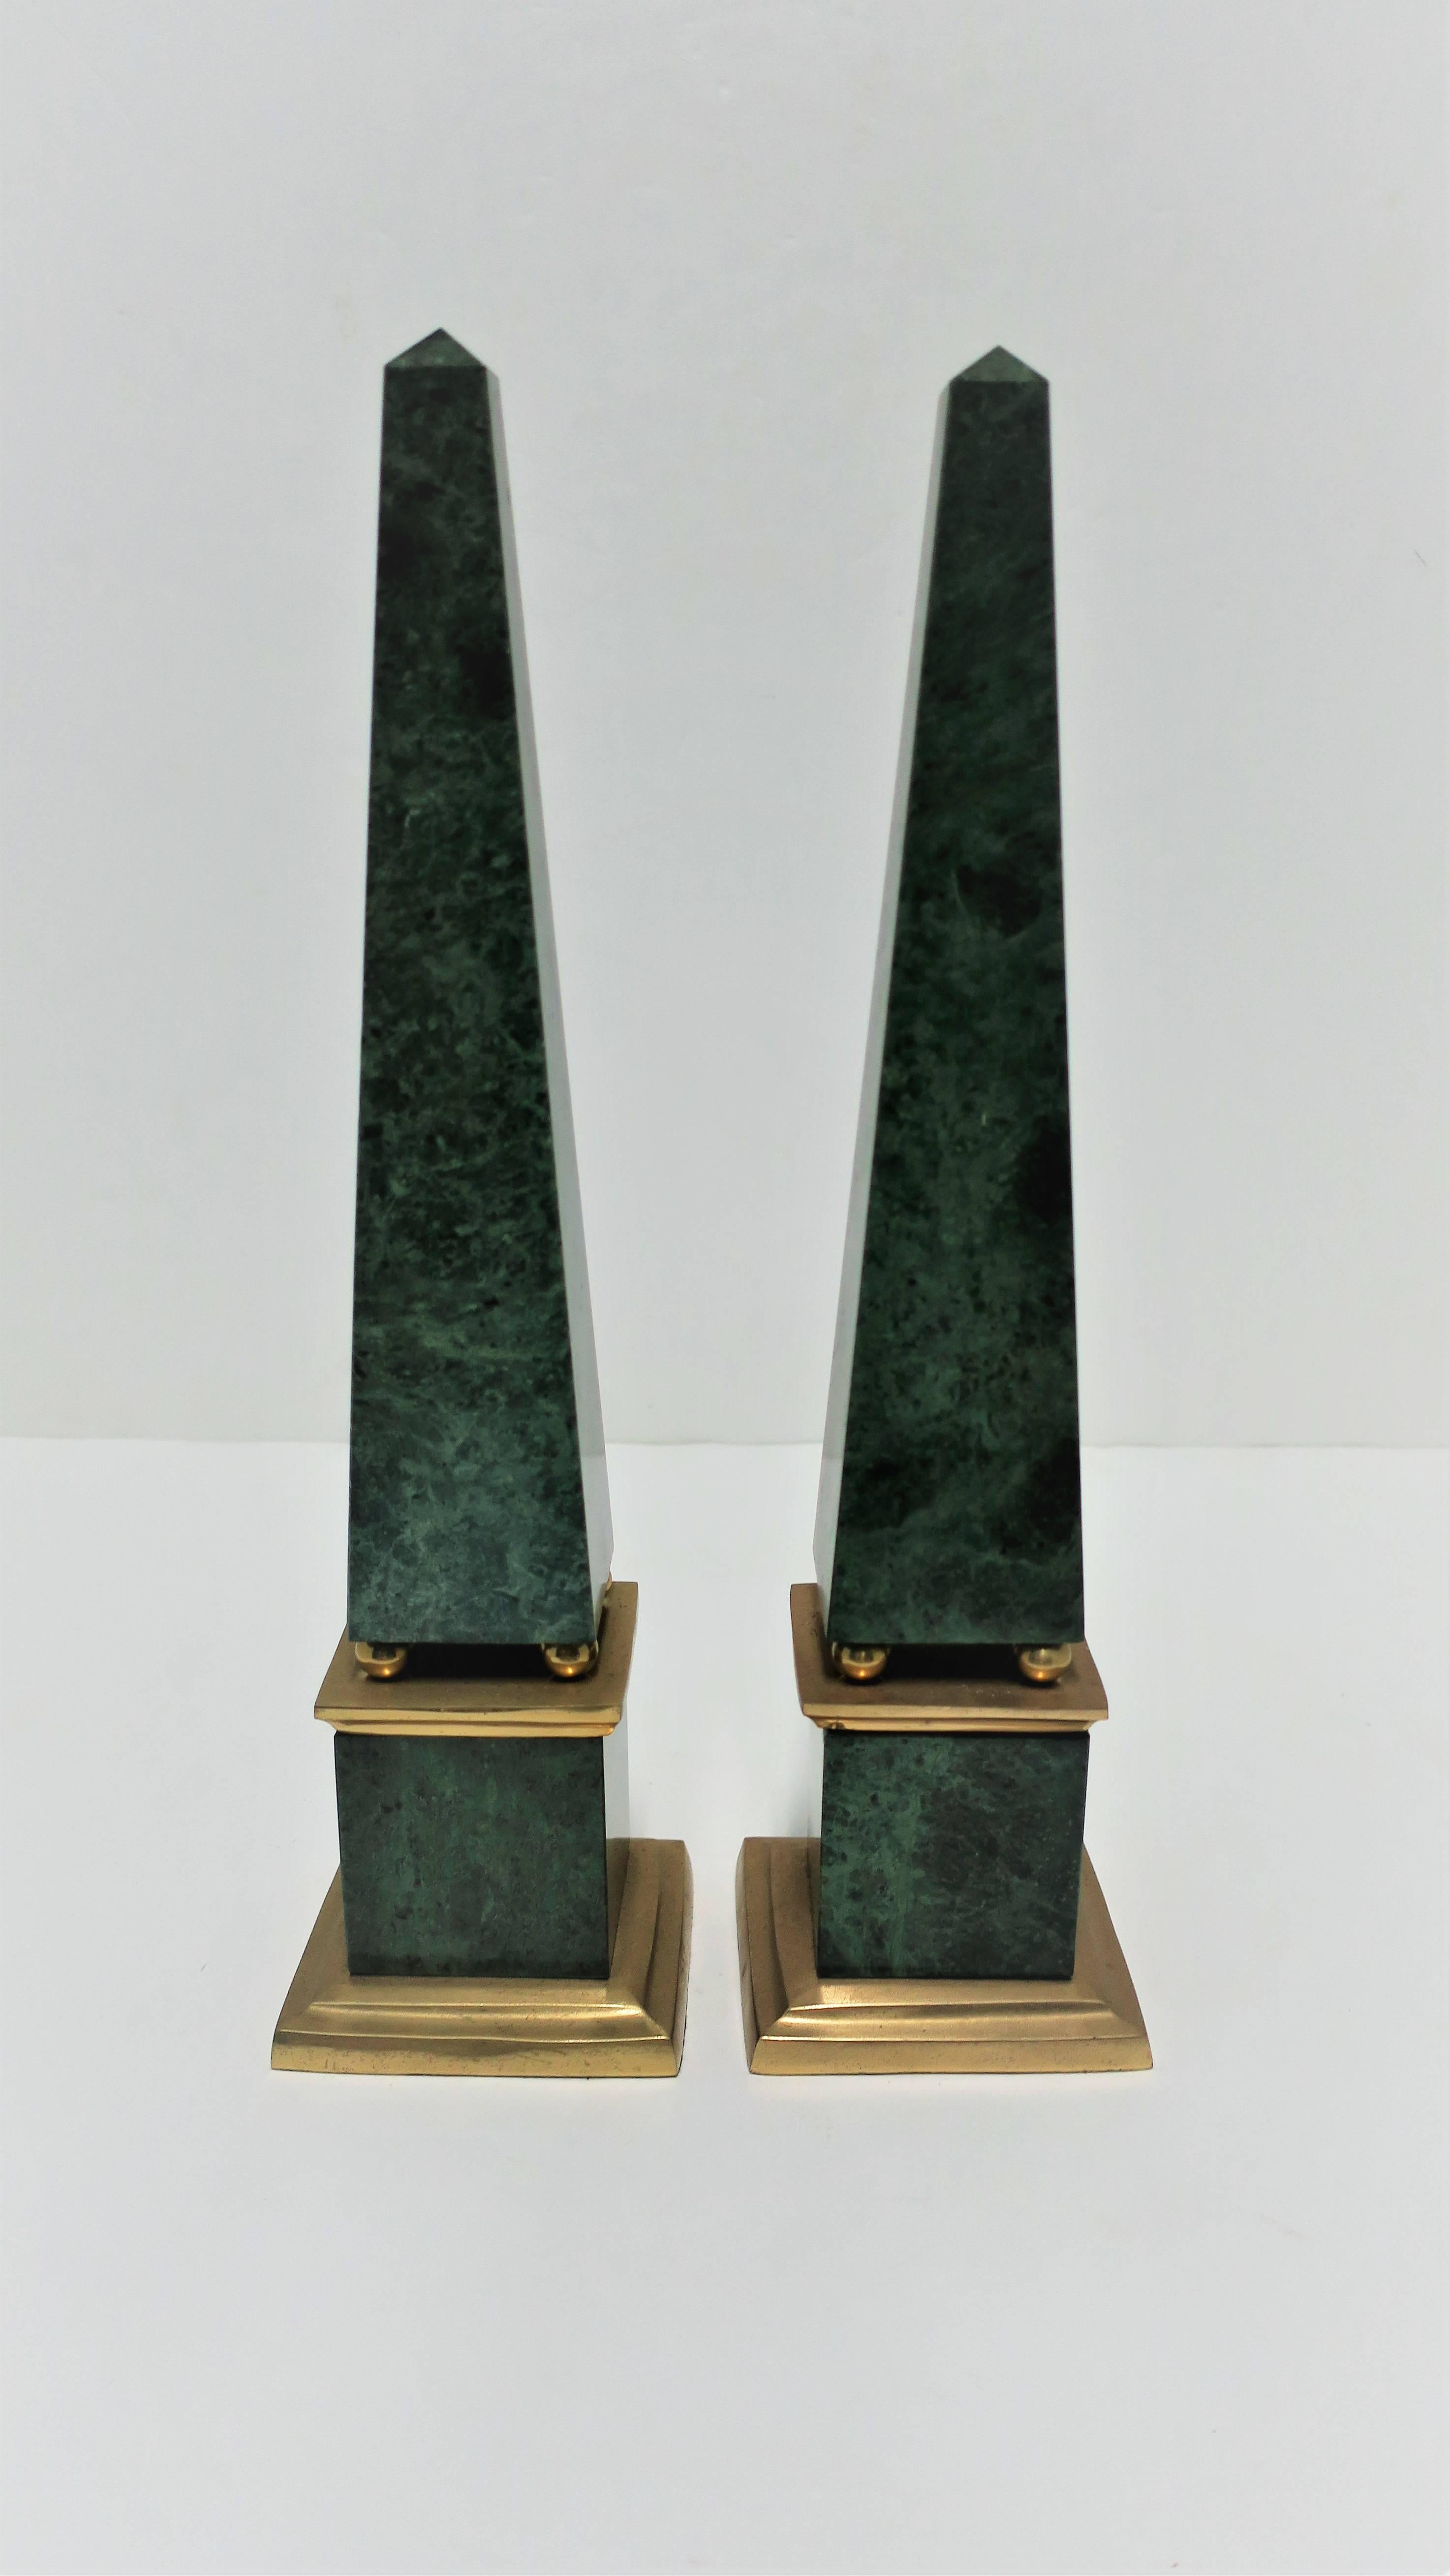 A substantial pair of vintage Modern green marble and bass obelisks, circa 1990s.

Each measure: 16 in. H x 3.75 in. square base

Pair available here online. By request, pair can be made available by appointment to the Trade in New York.